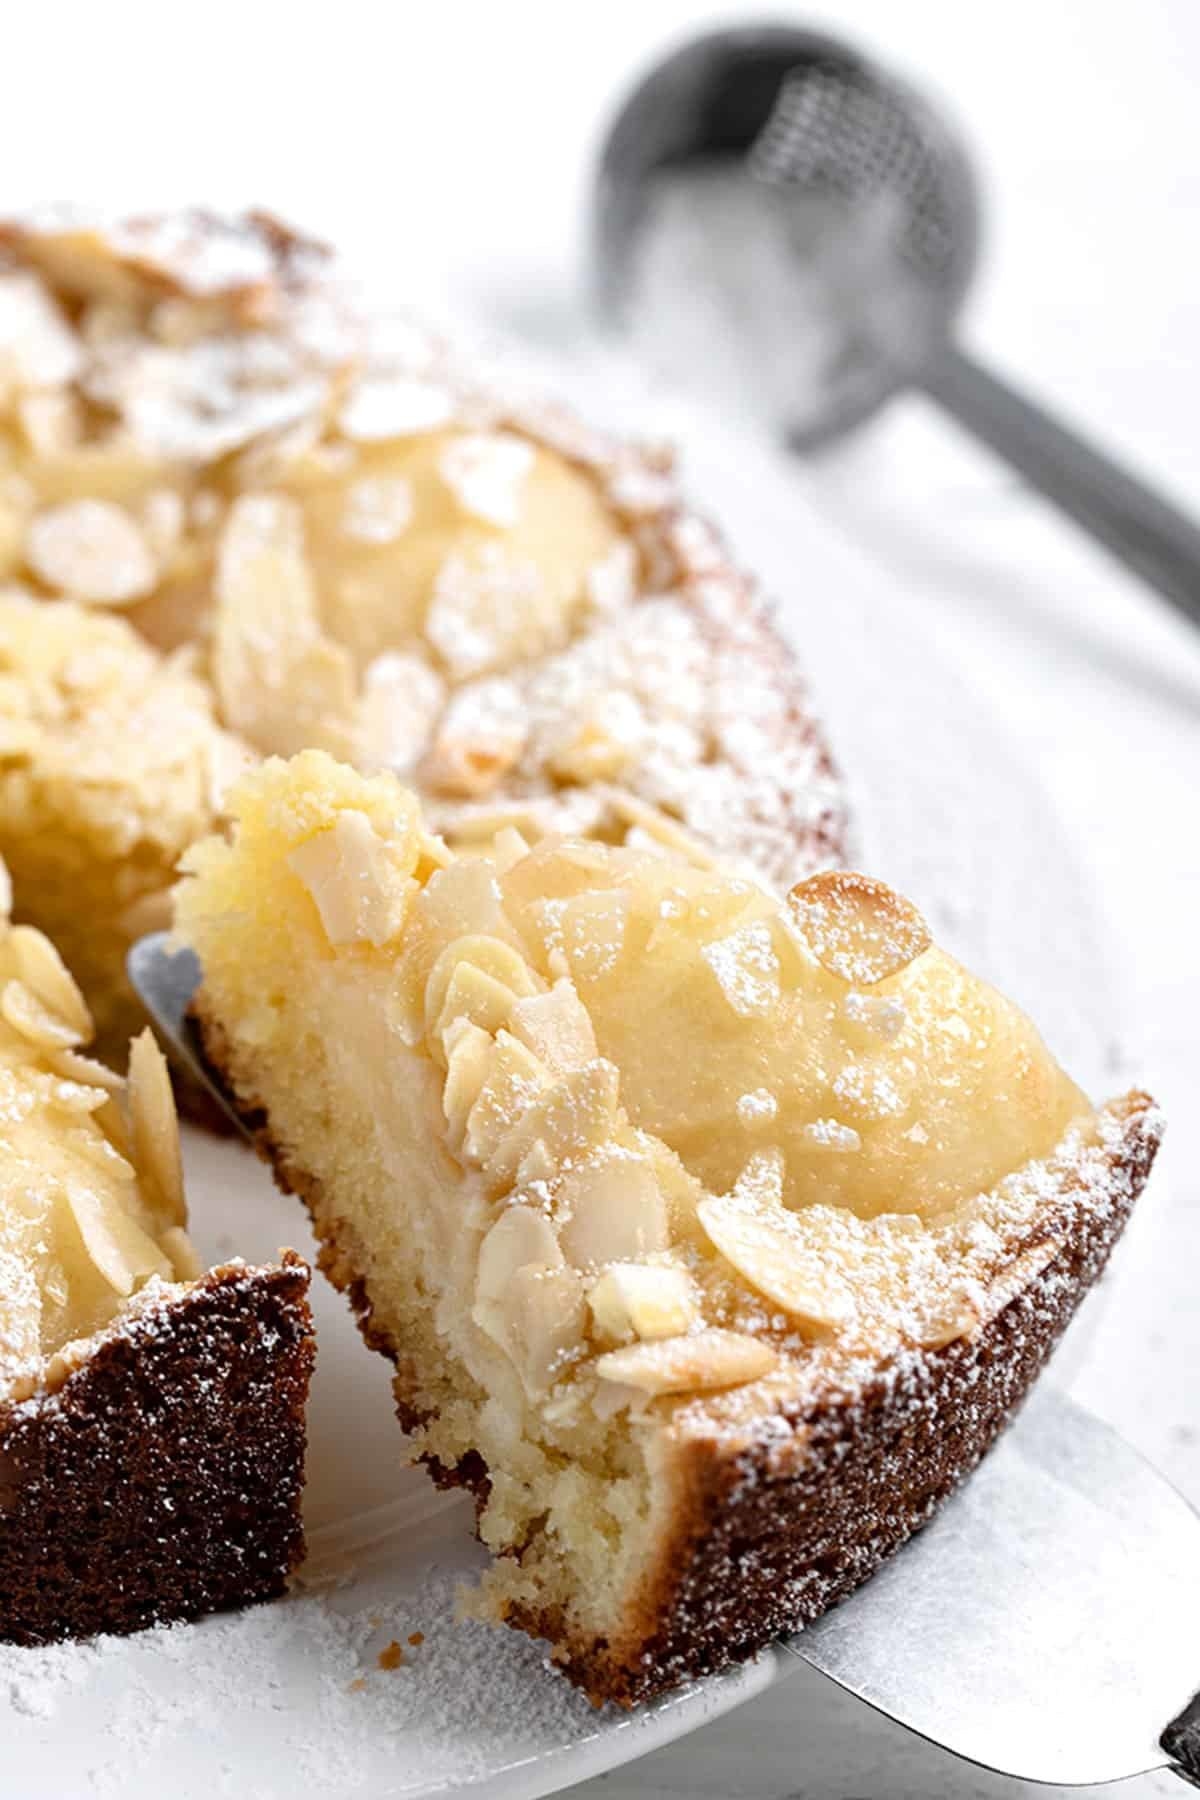 Pear and almond cake.